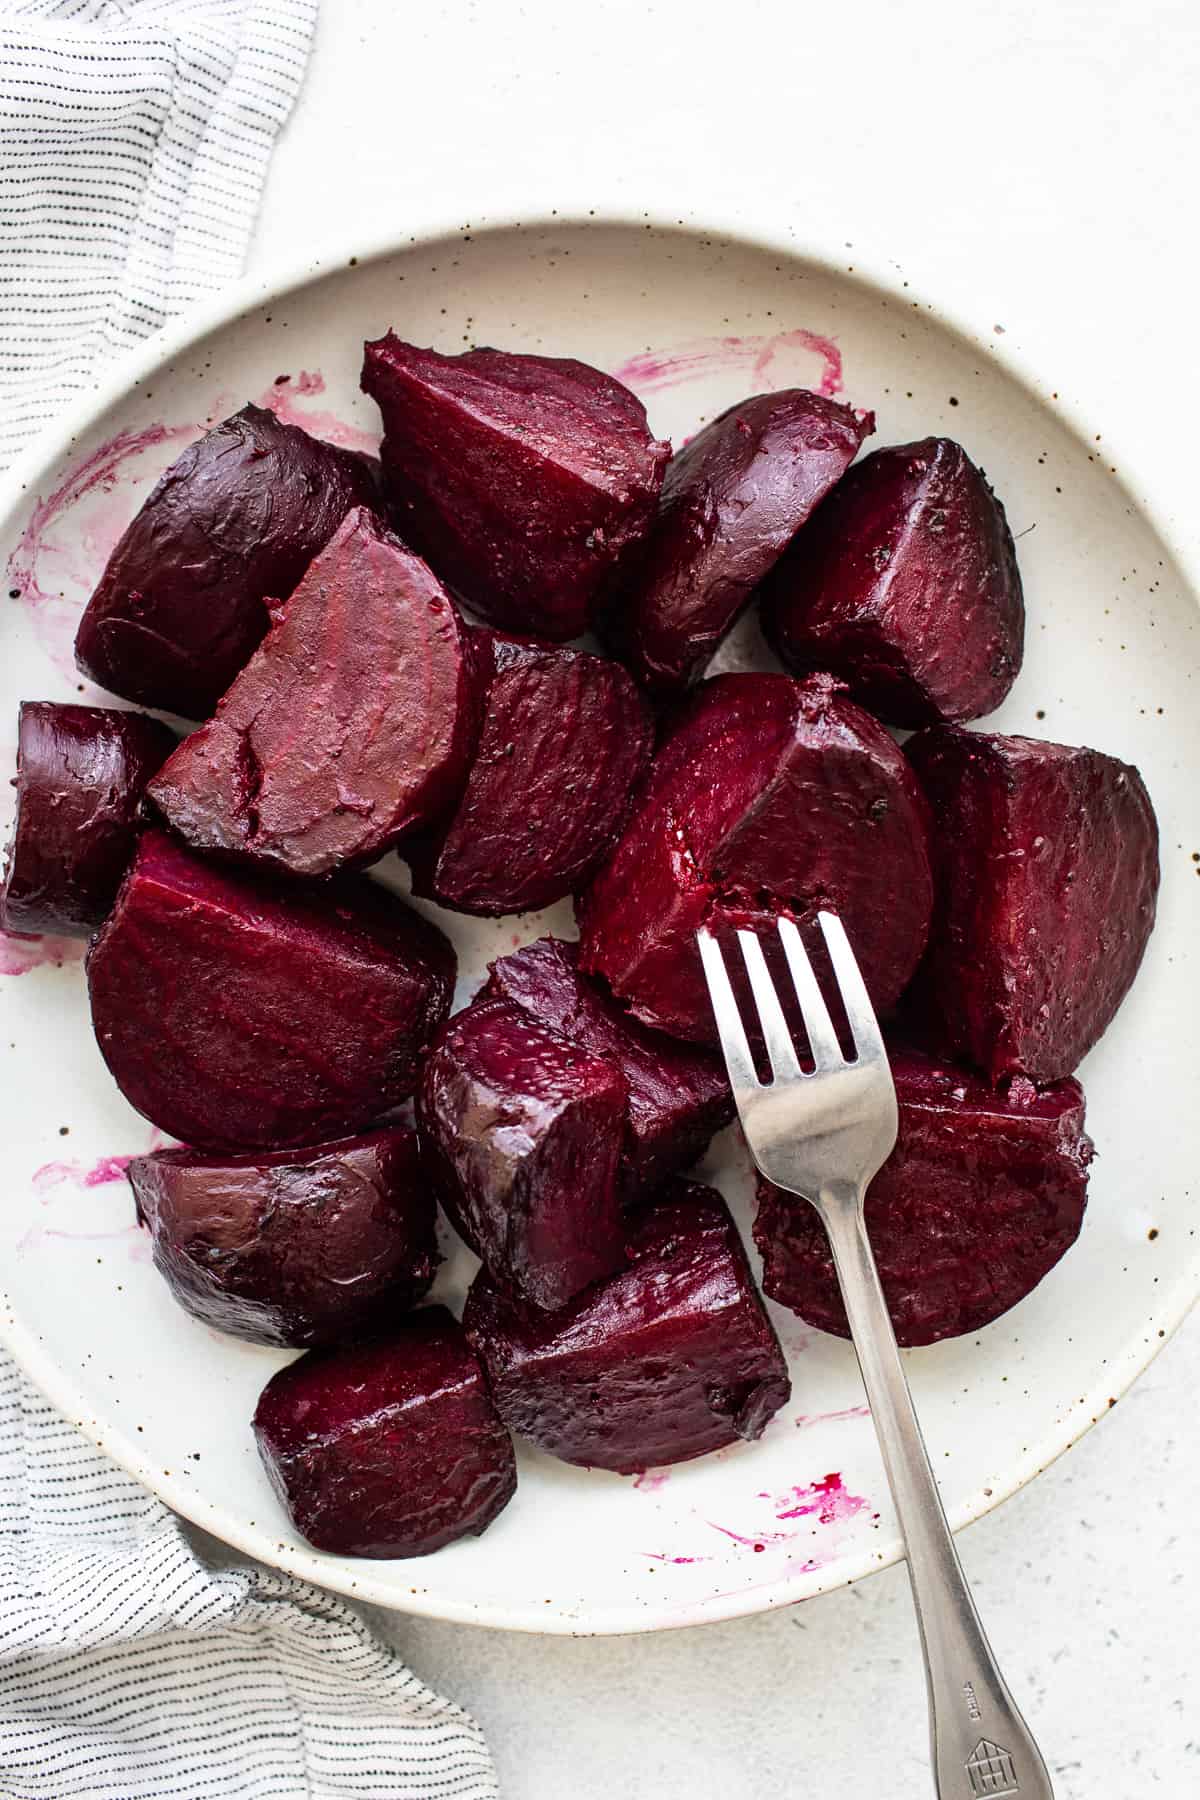 Roasted beets on a plate.